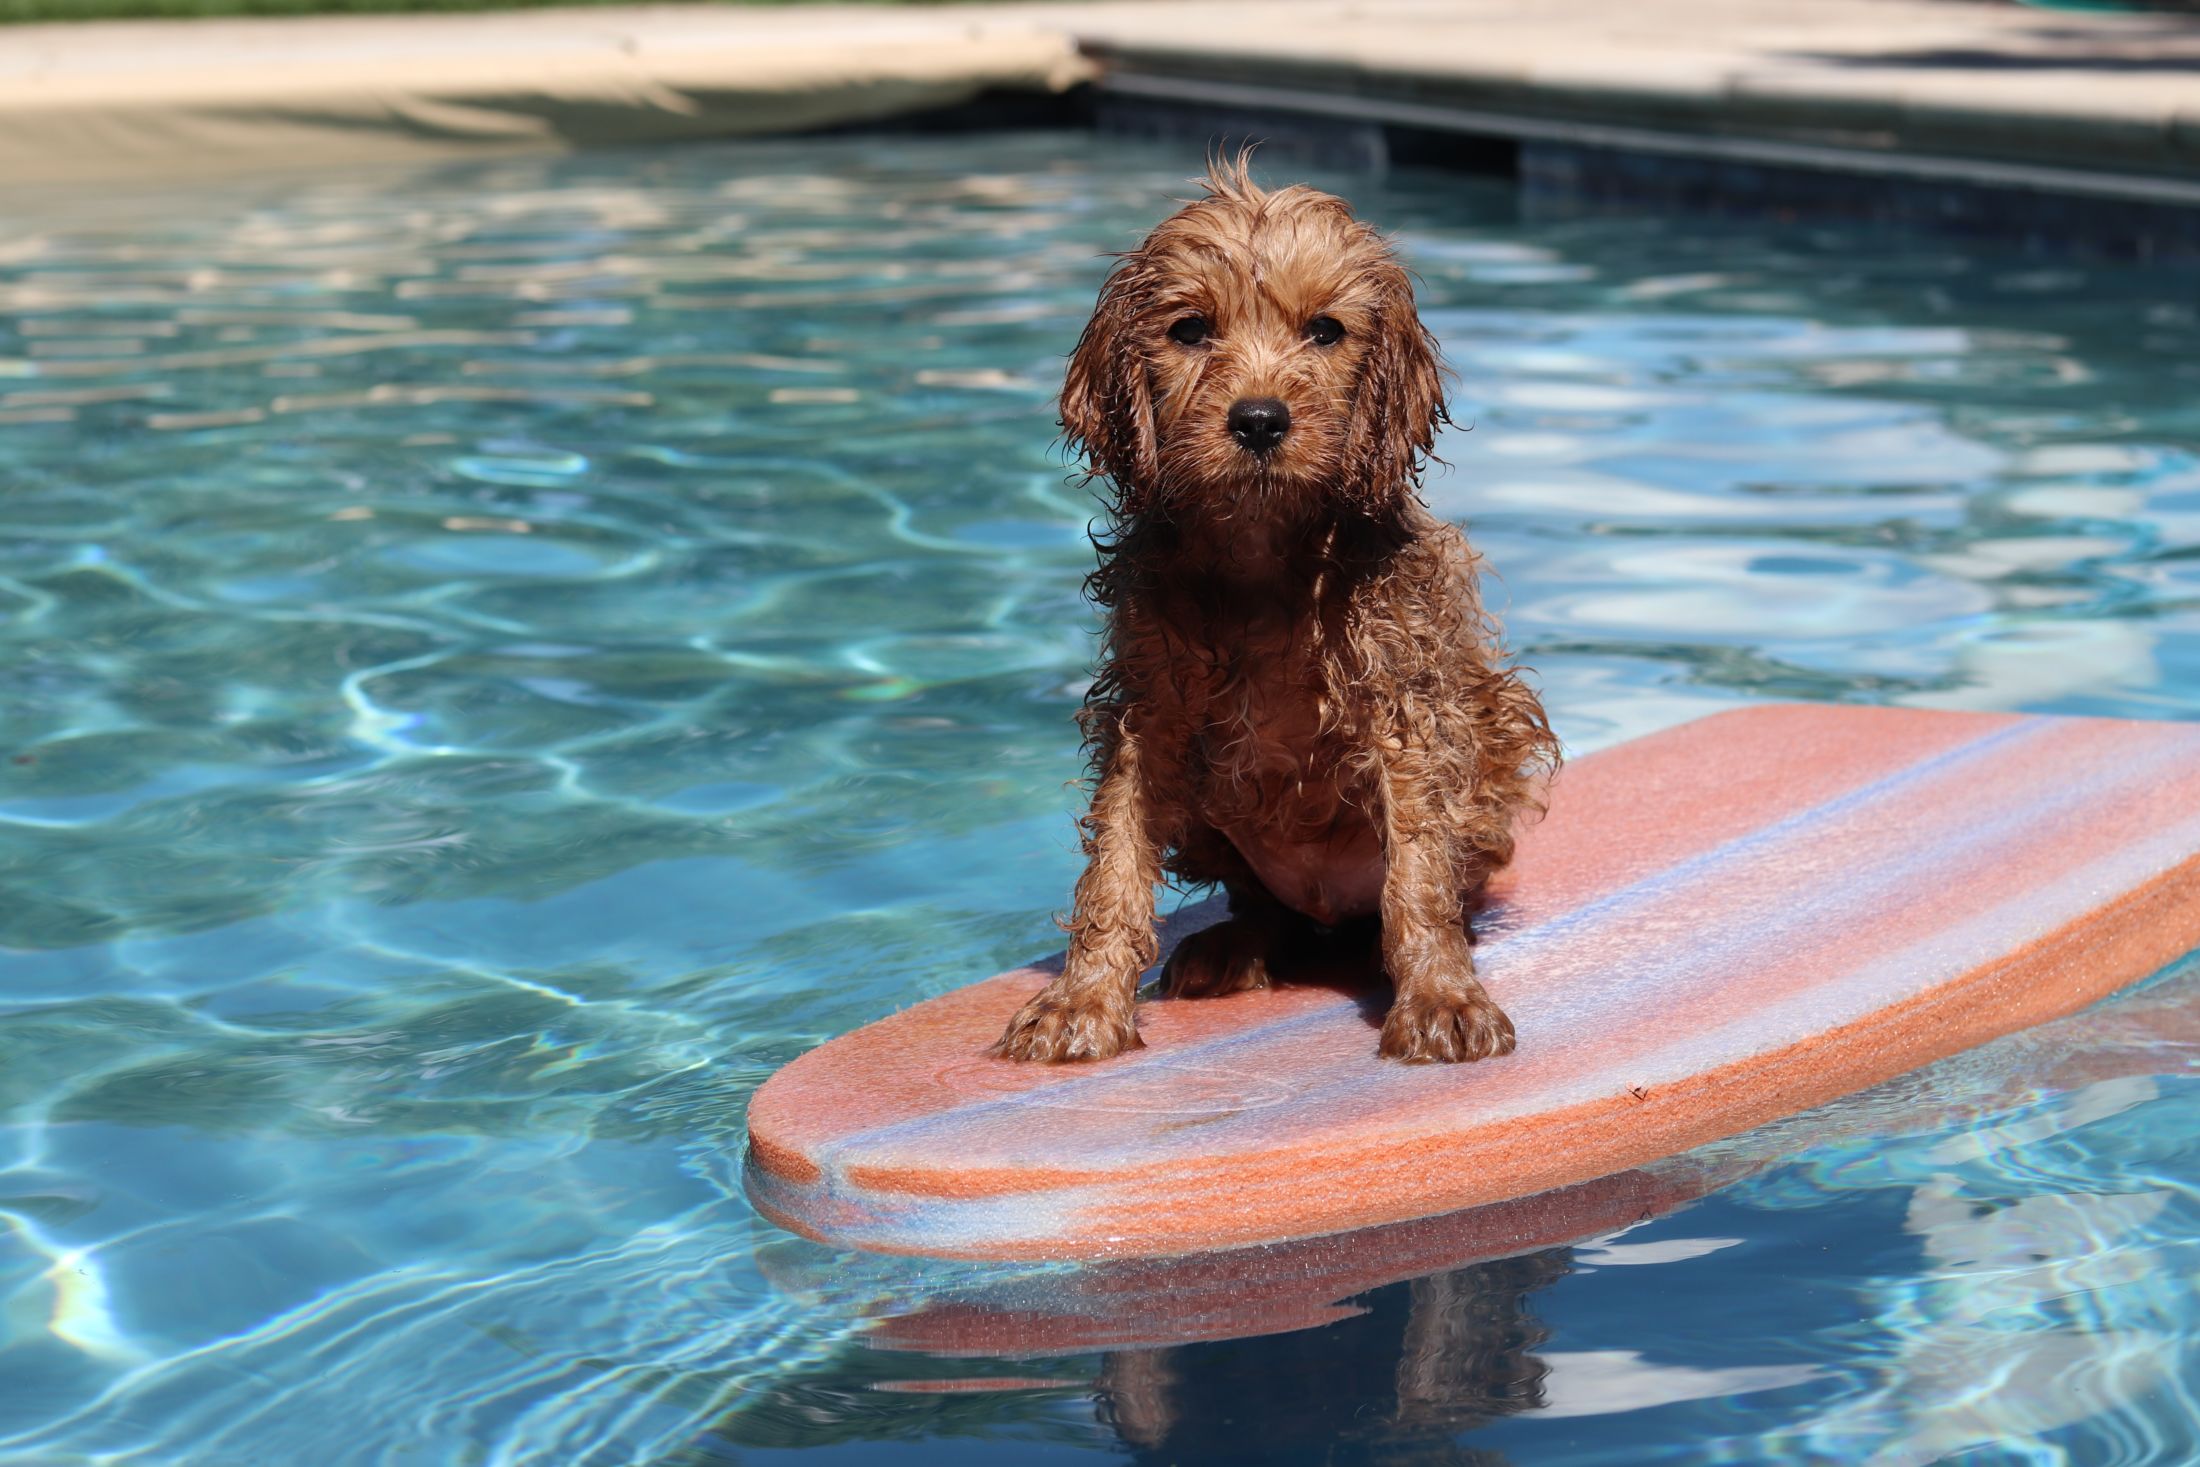 Can dogs swim in pools